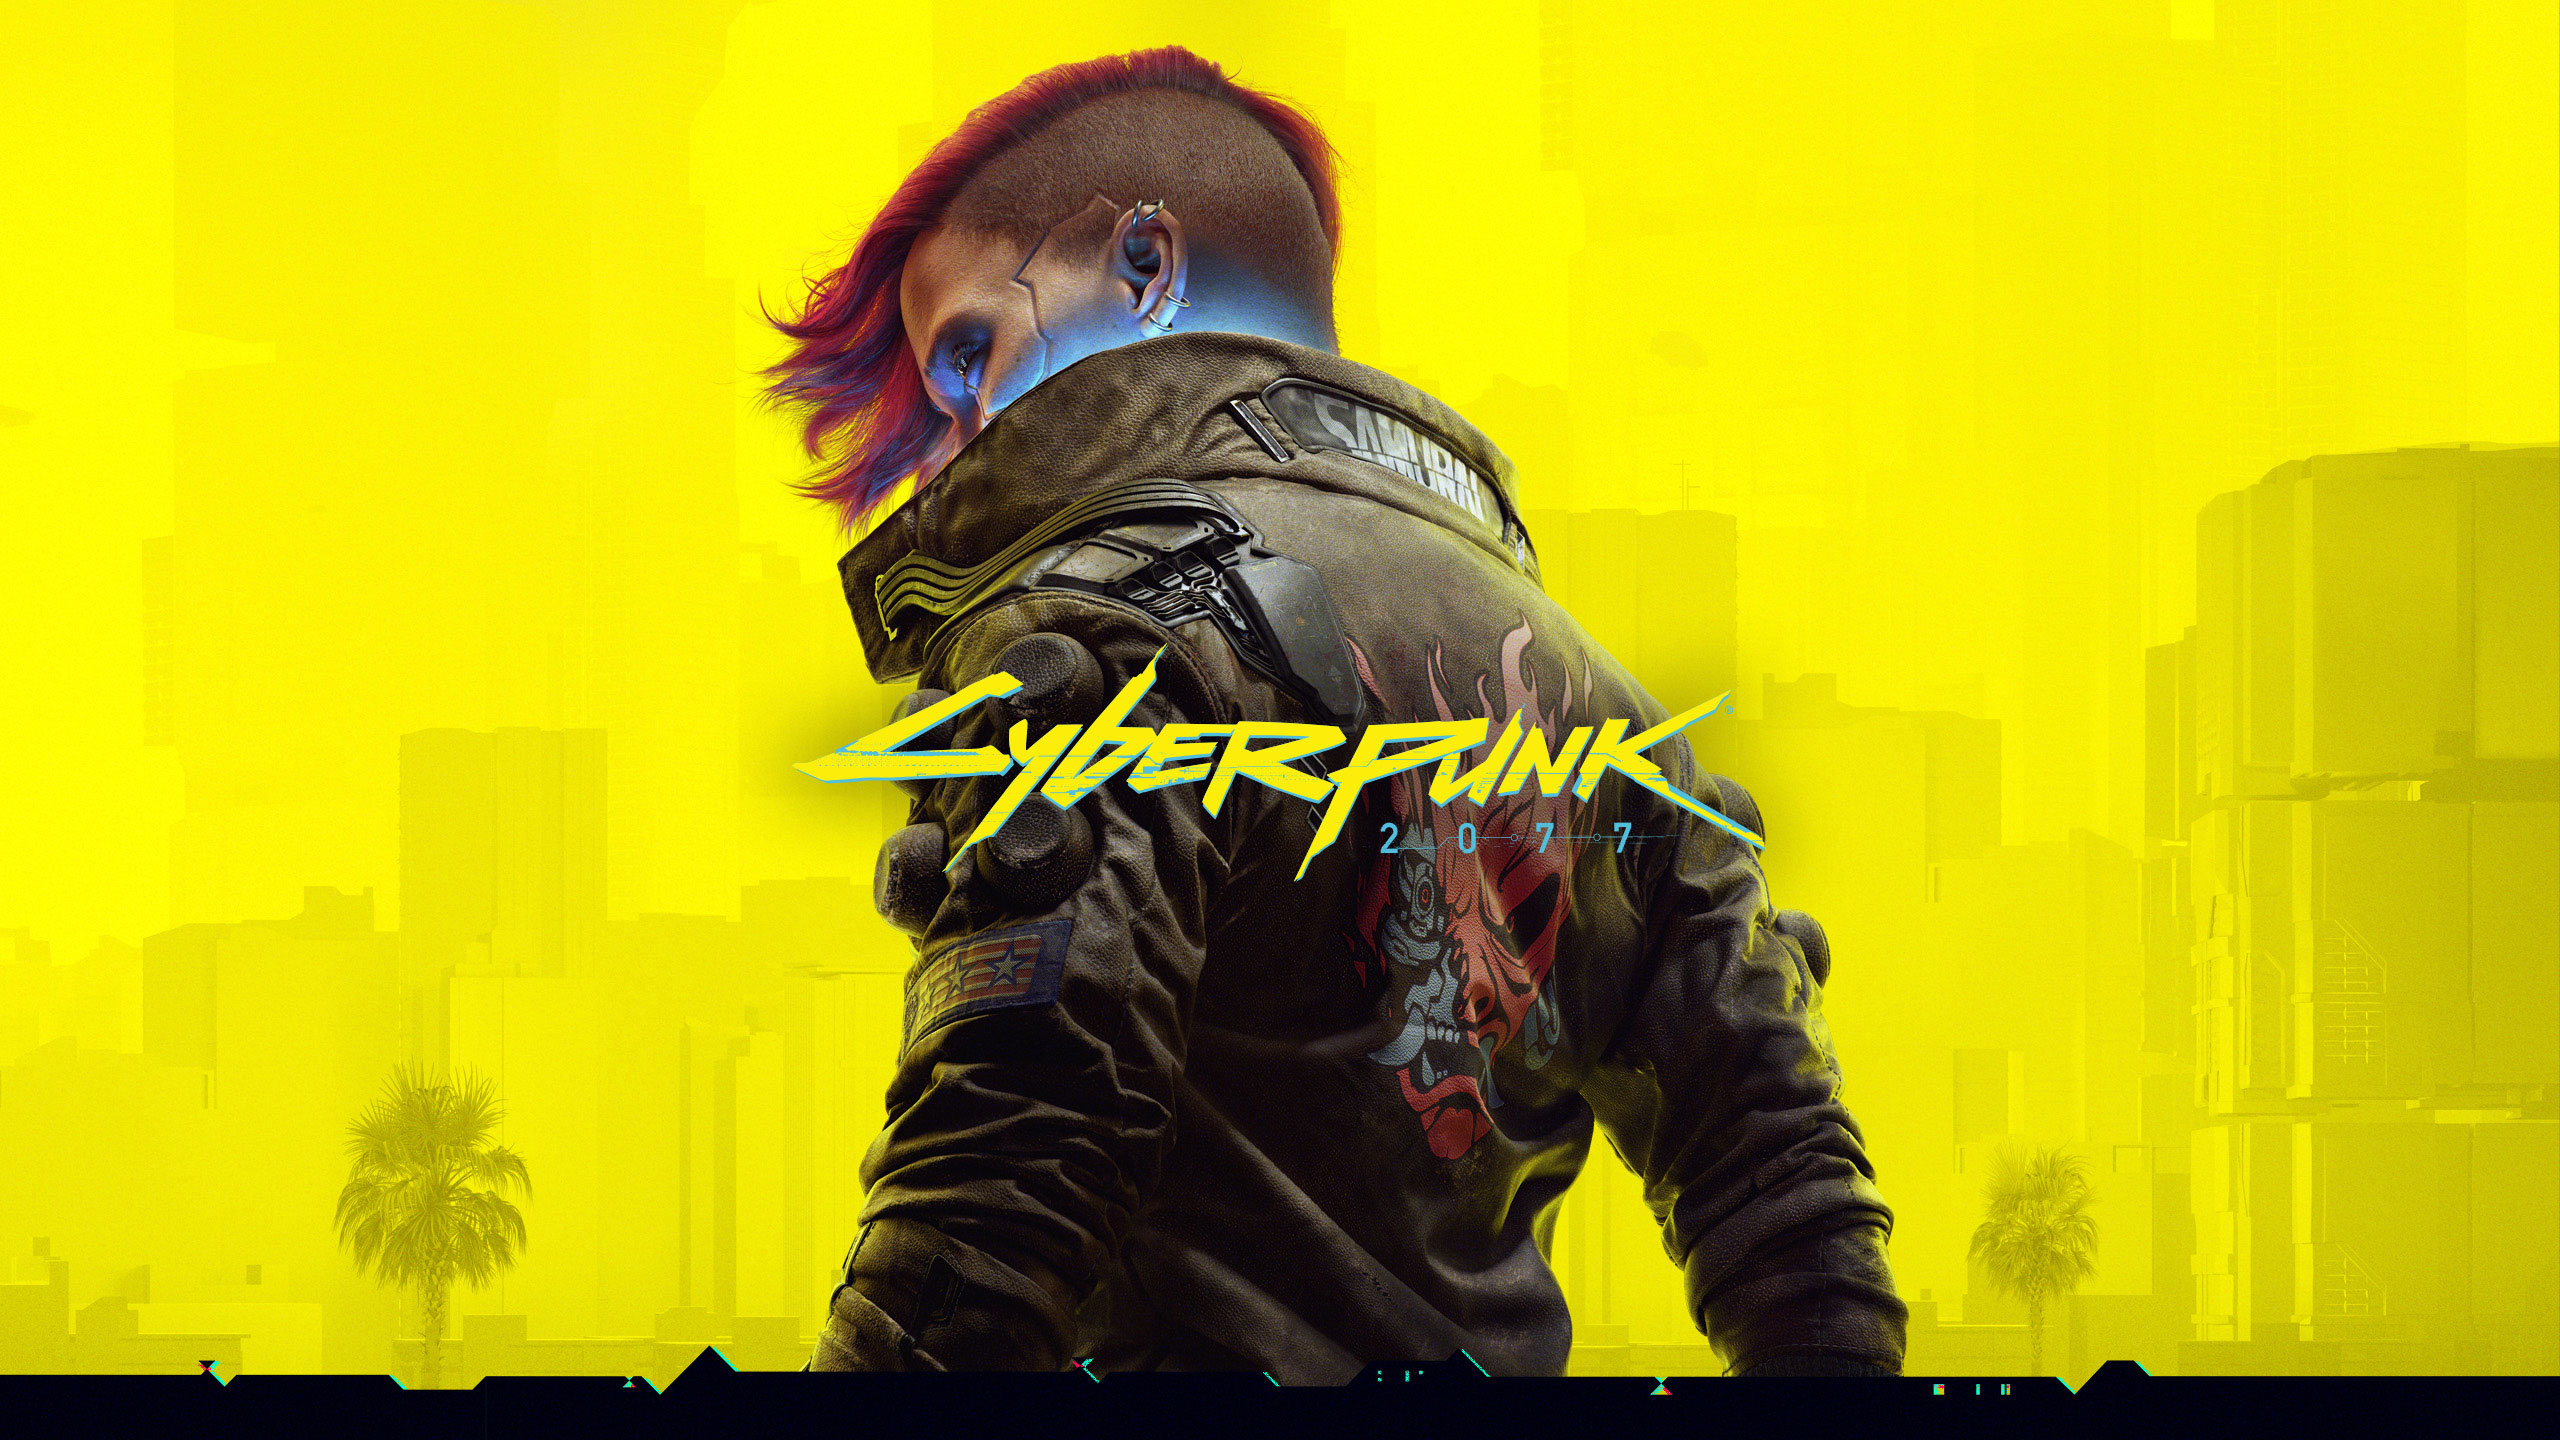 CYBERPUNK 2077 PS5 Version Full Game Free Download